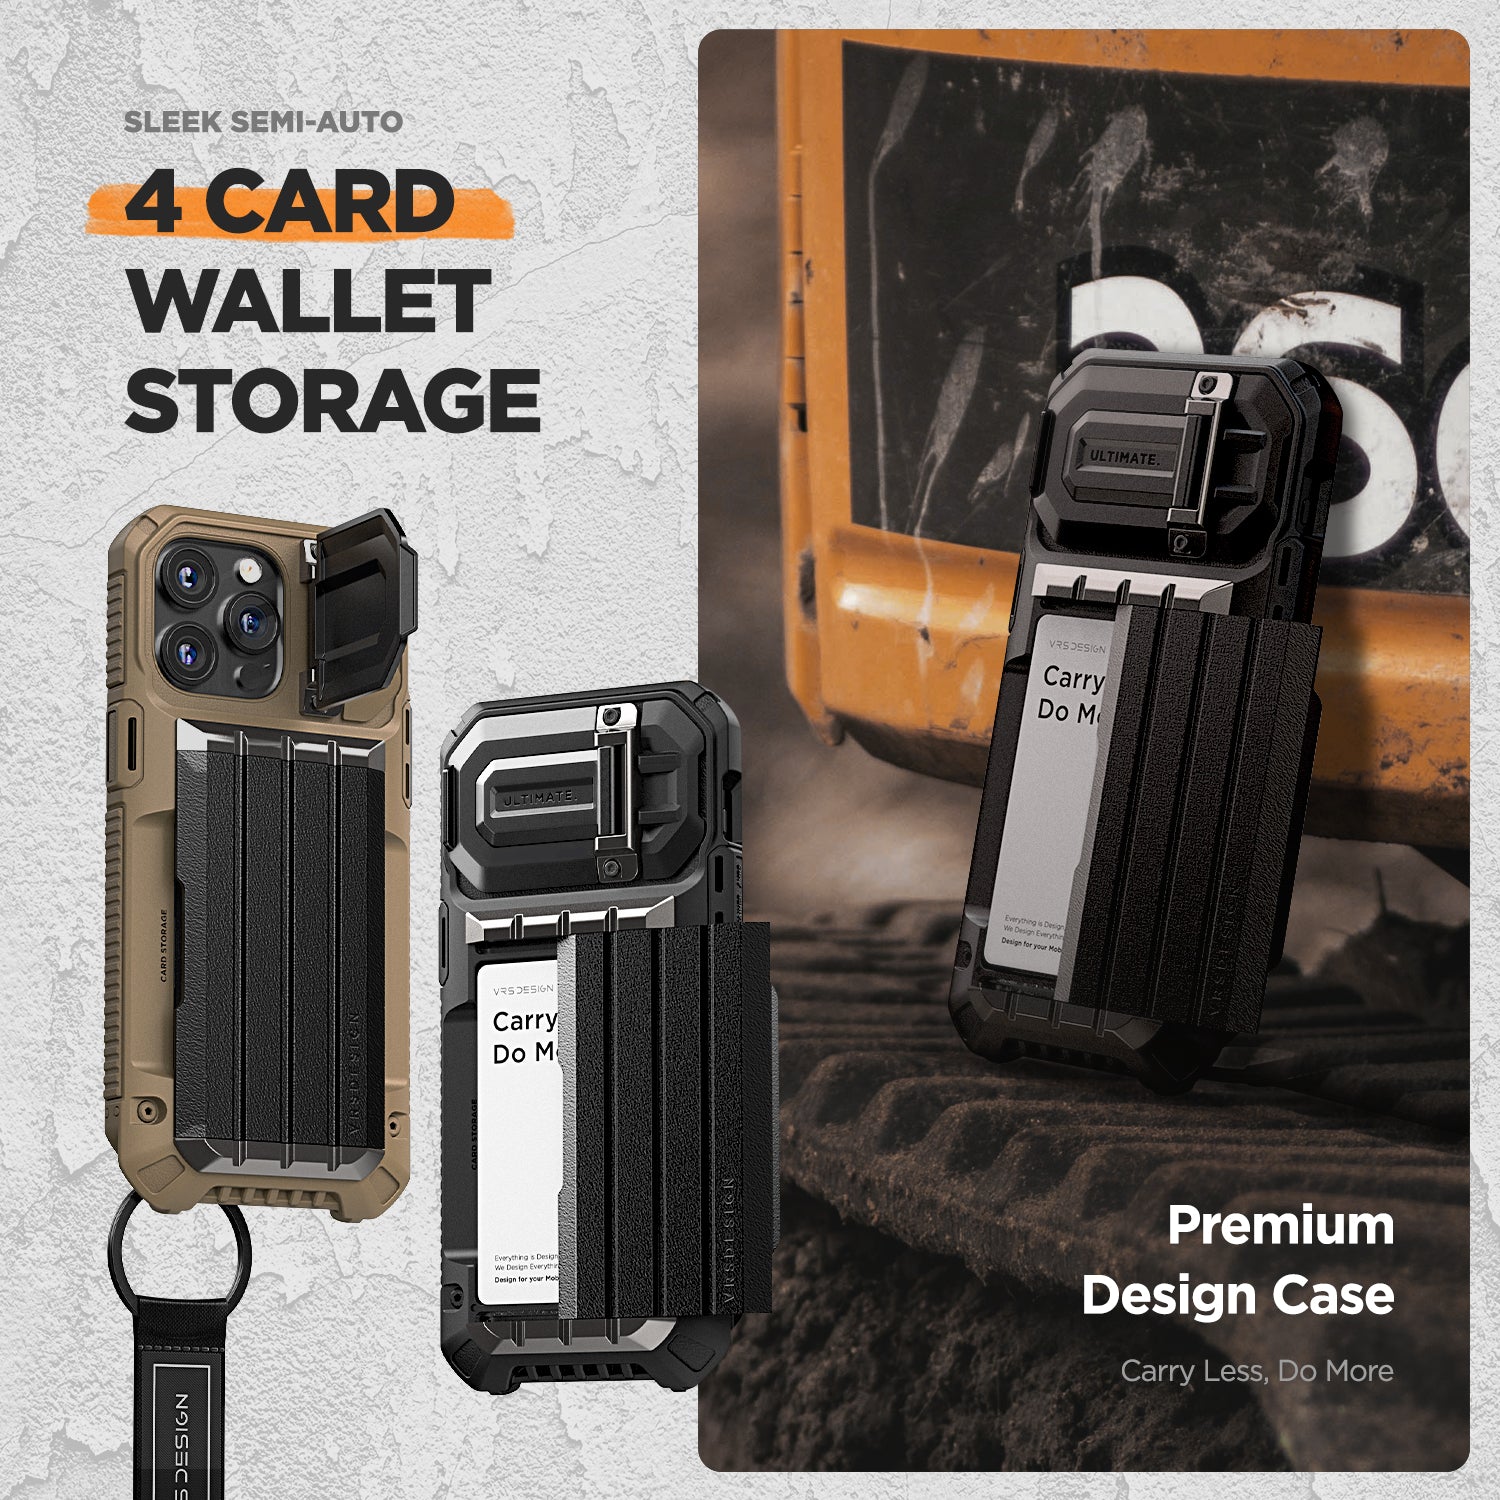 Apple 15 Pro Max rugged Glide wallet case with multiple durable and convenient card slot with sleek minimalist look by VRS card holder wallet protection strap carabiner accessories